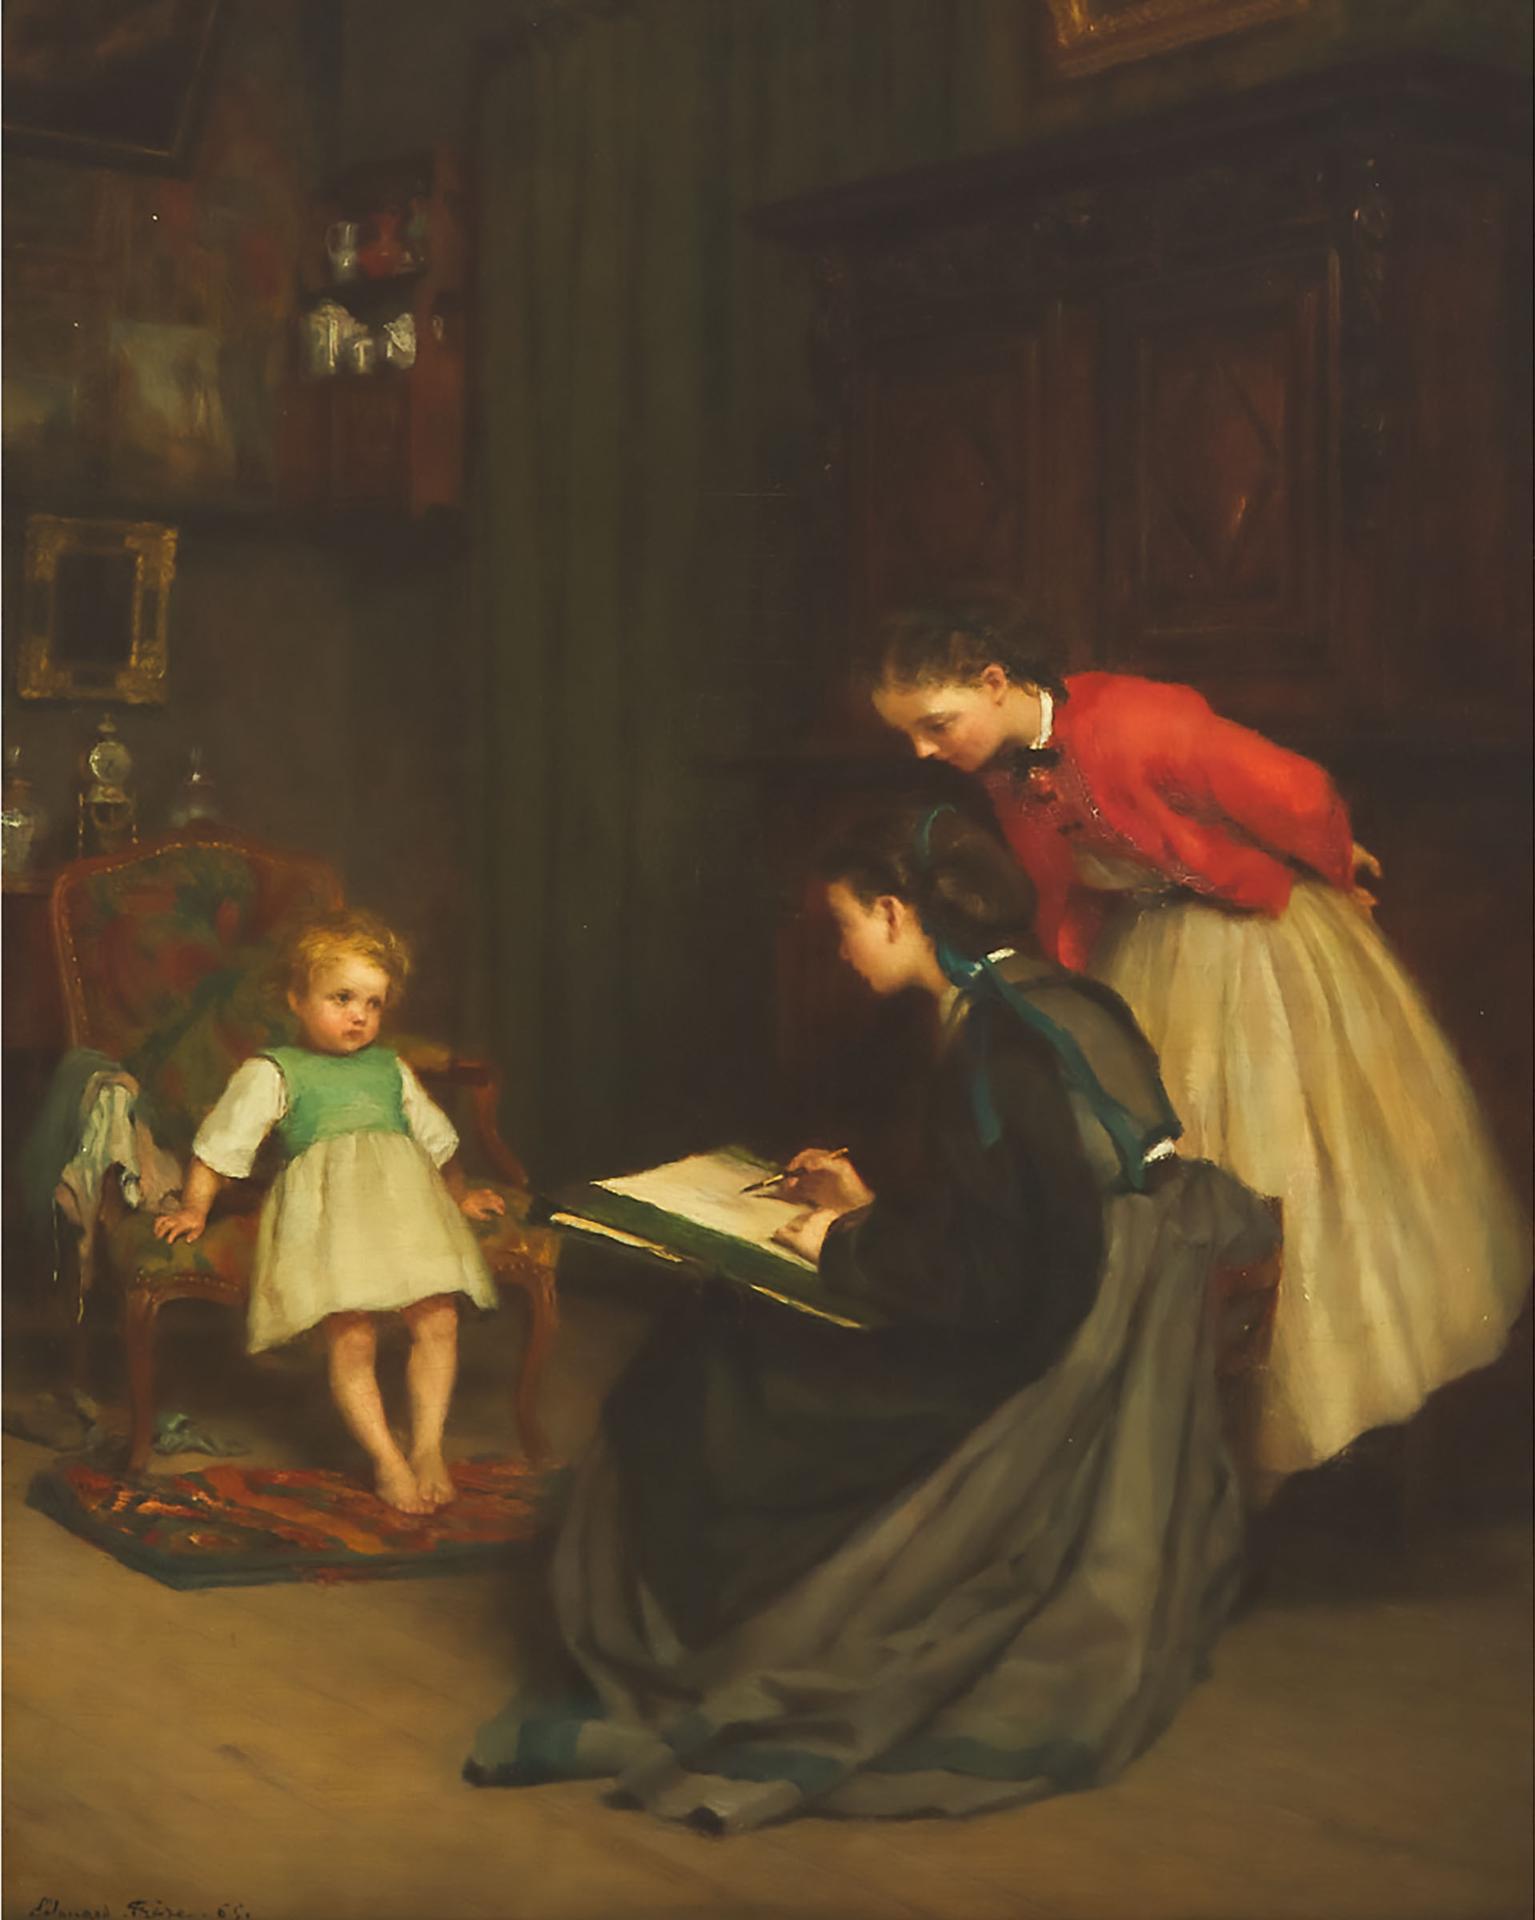 Pierre Edouard Frère (1819-1886) - Painting Baby, 1865